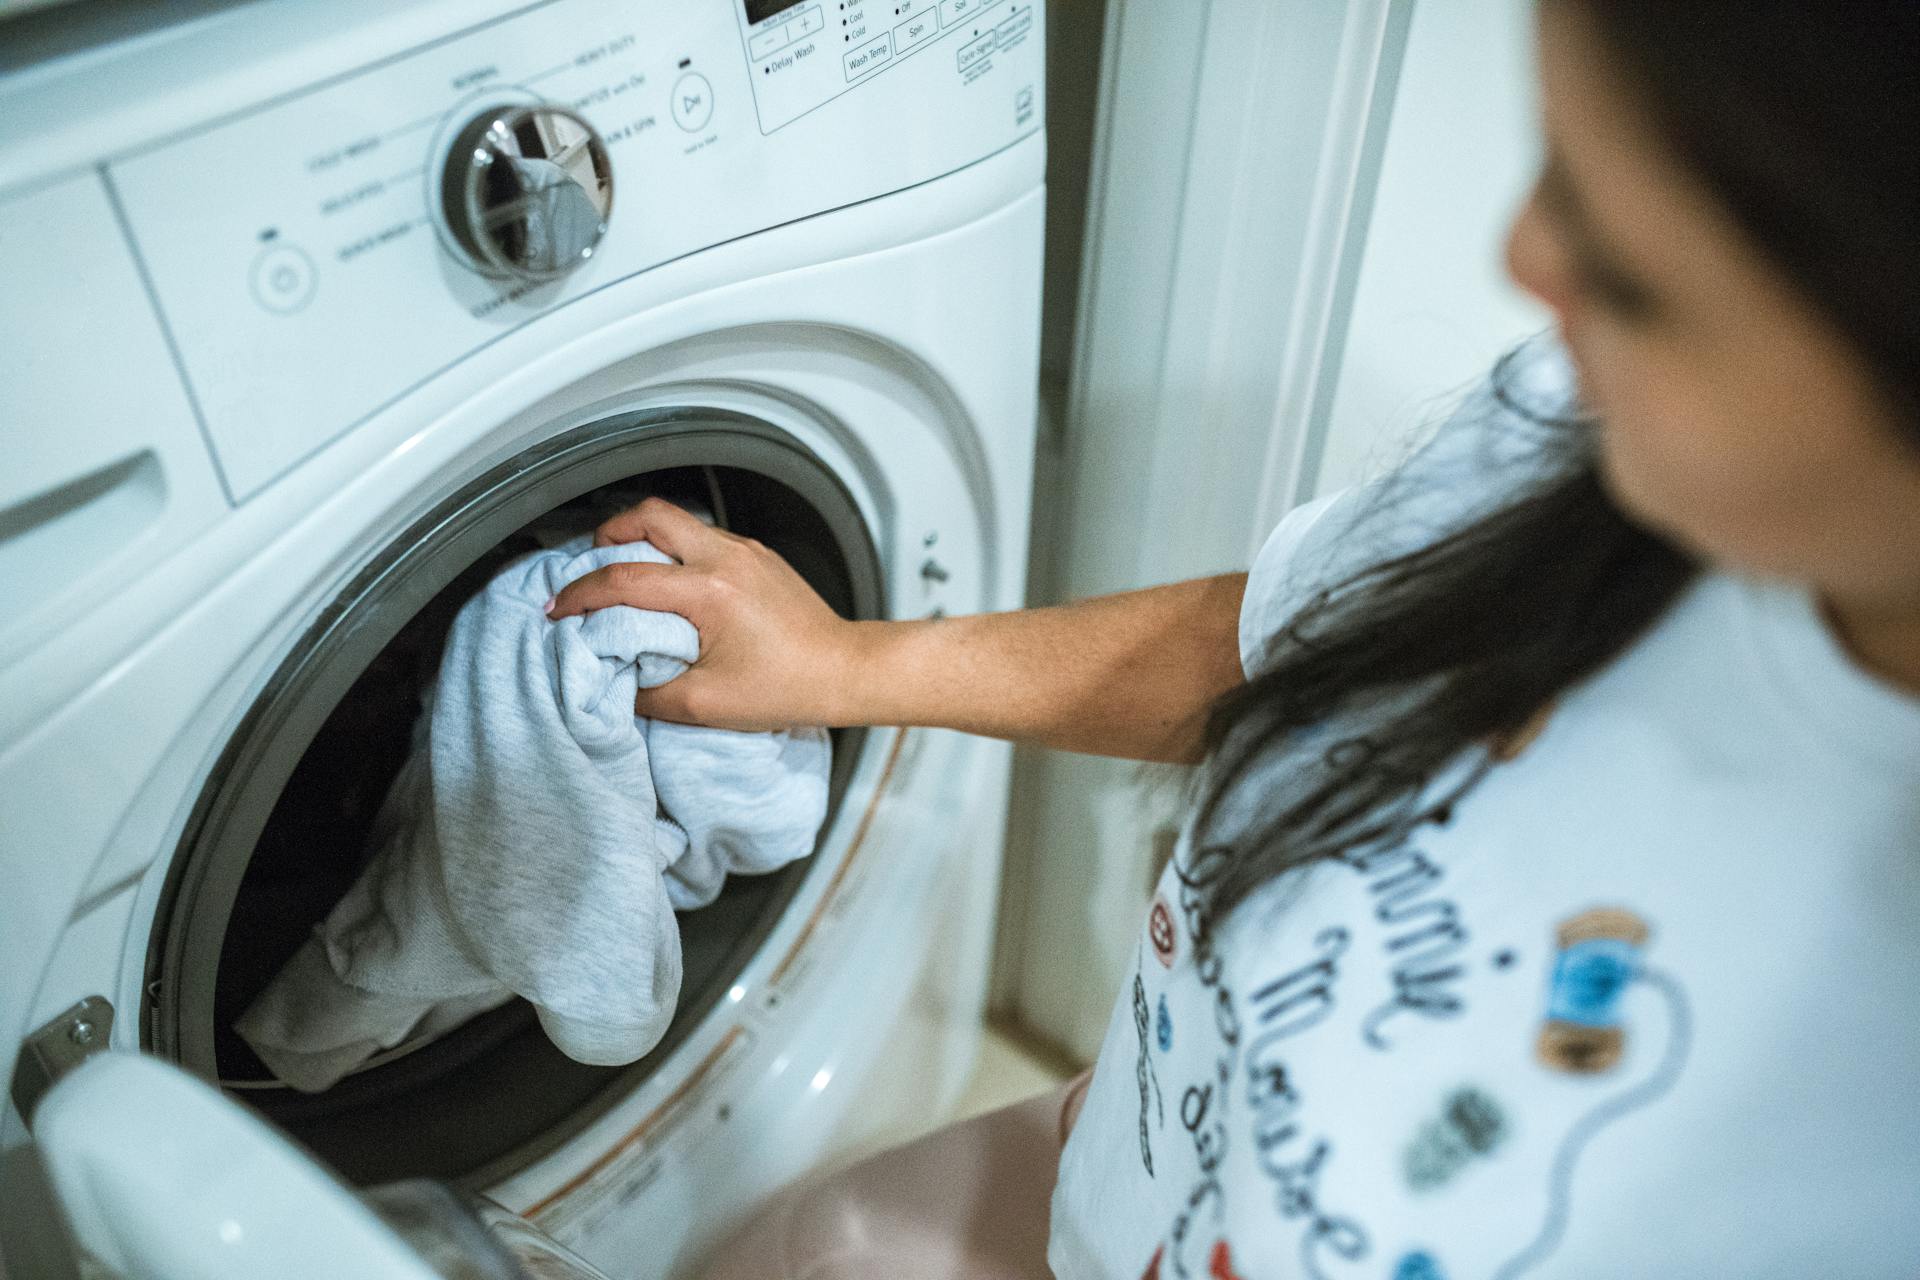 Woman tossing clothes into the washing machine | Source: Pexels